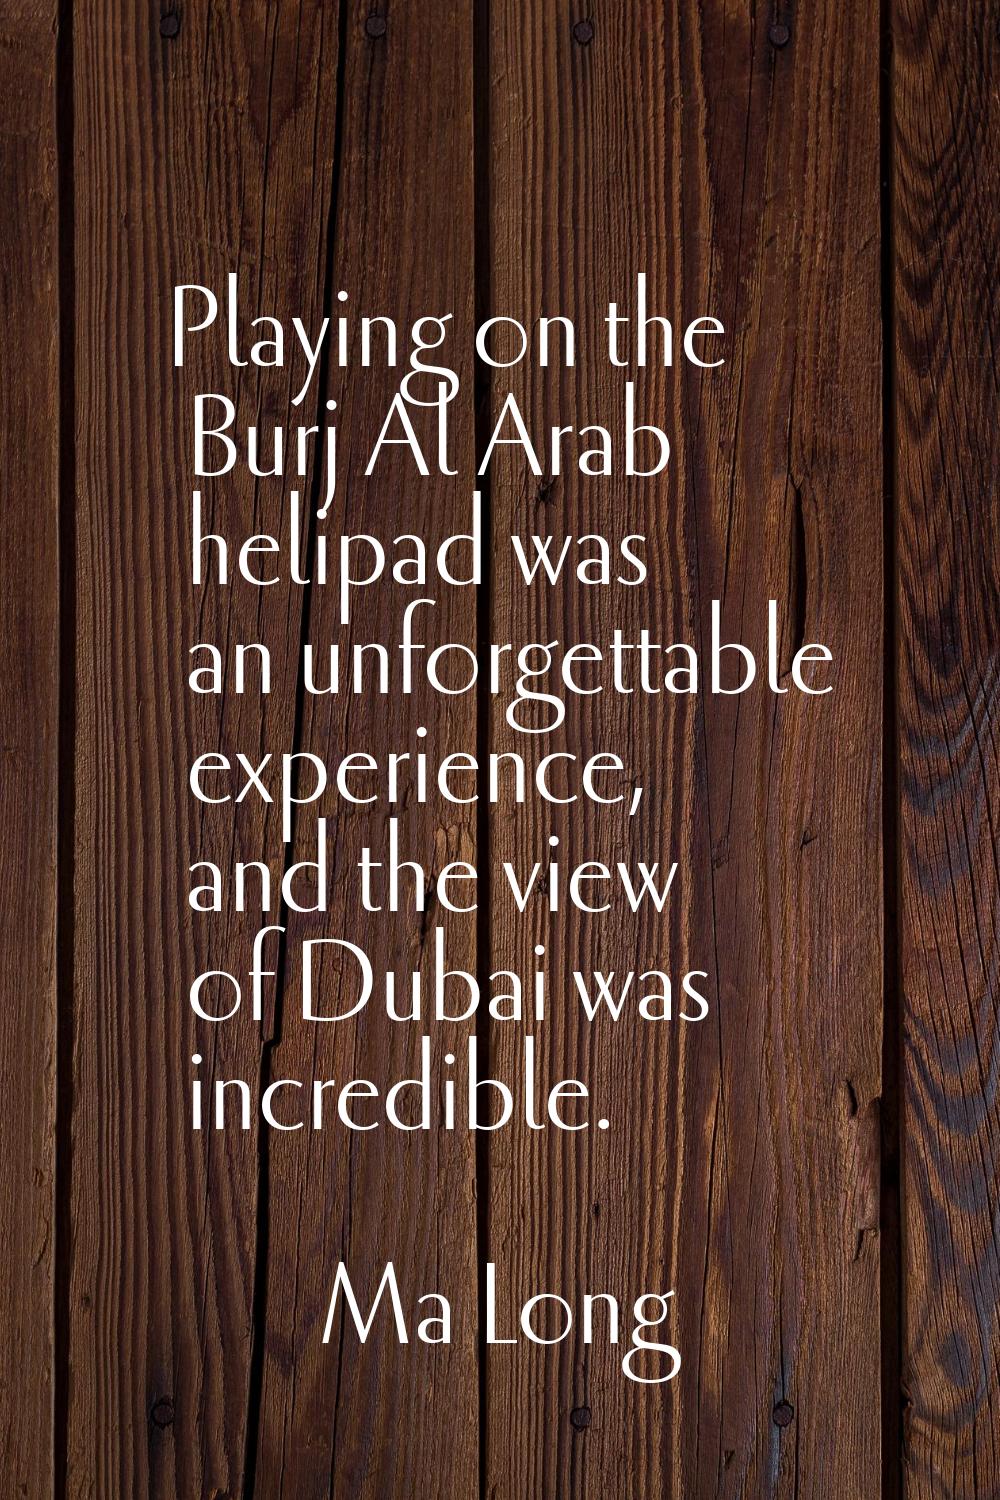 Playing on the Burj Al Arab helipad was an unforgettable experience, and the view of Dubai was incr